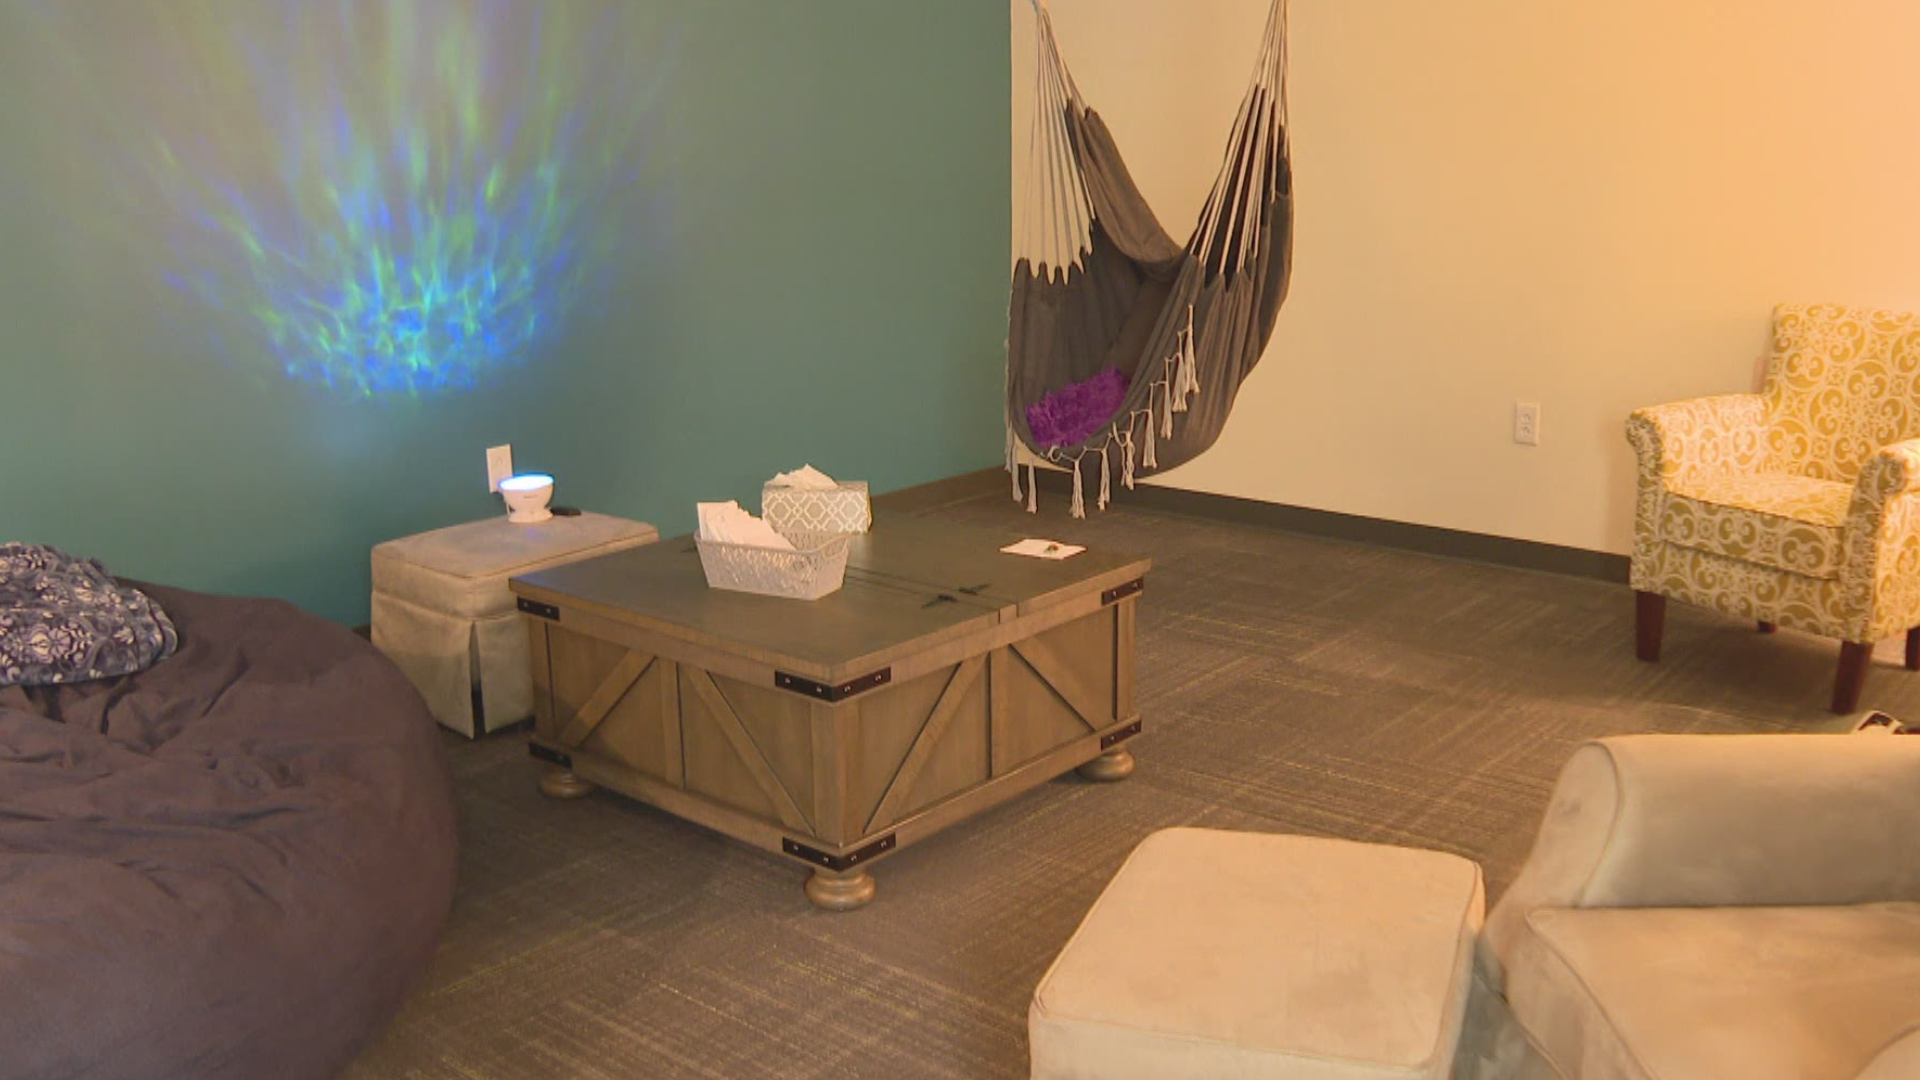 Ascent 121, an agency that works with survivors of human trafficking and sexual exploitation, held an open house at their new facility on the east side.